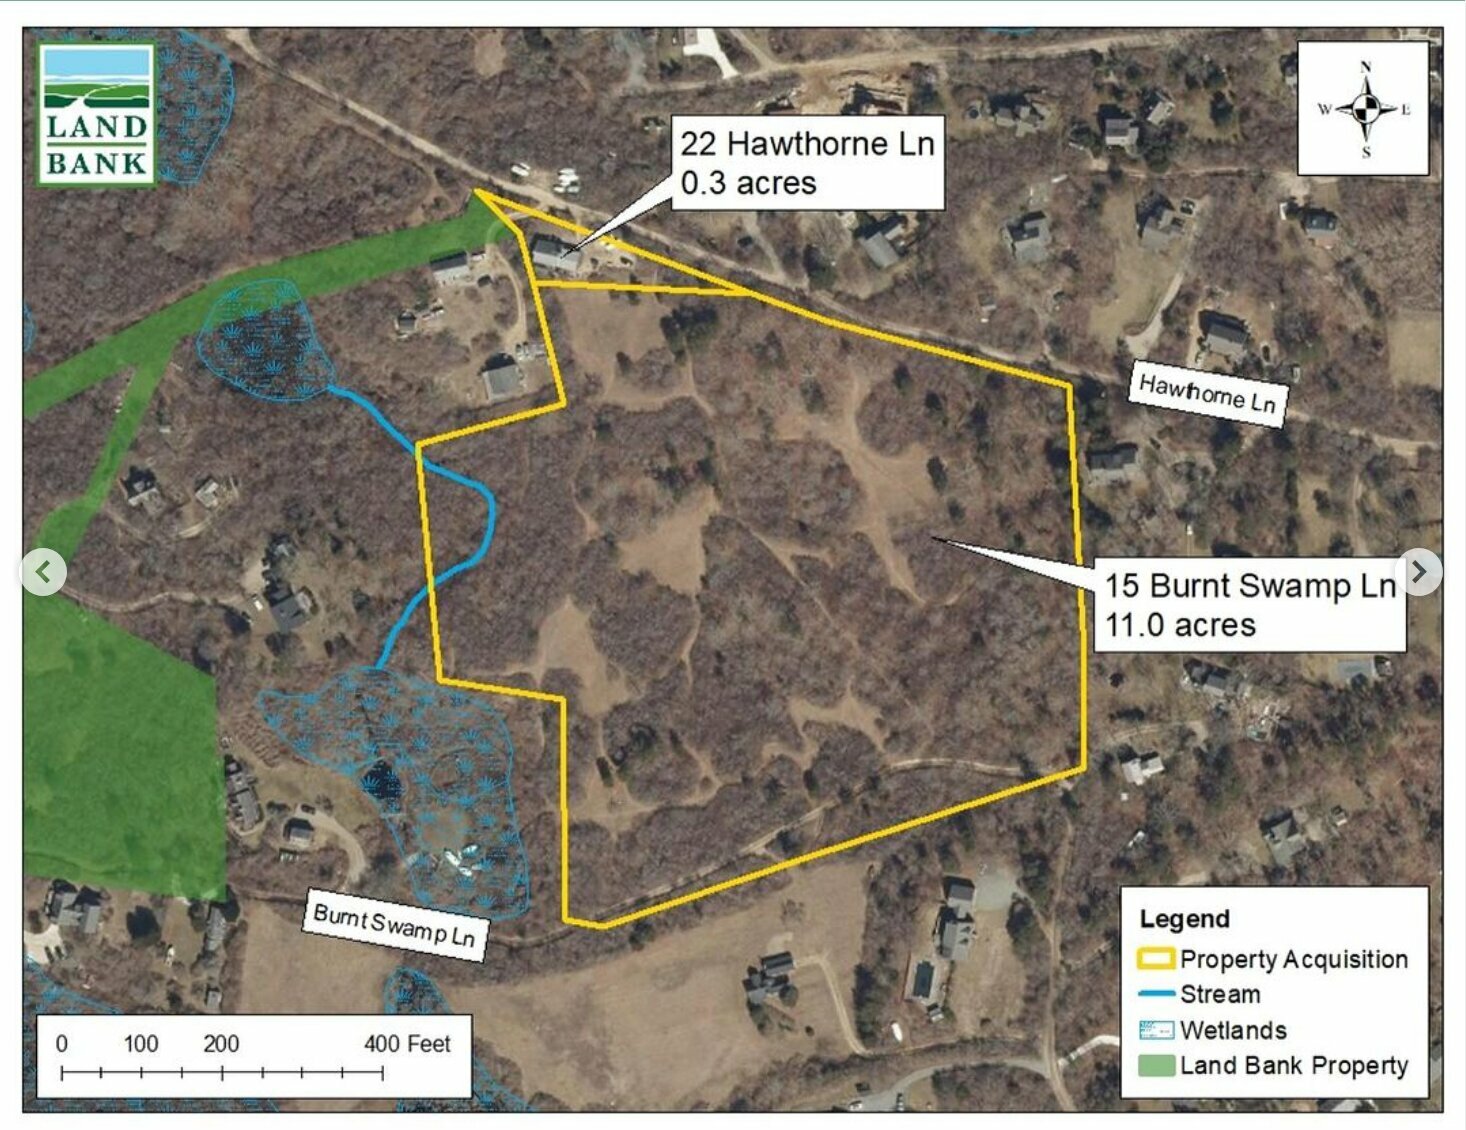 The Land Bank has prohibited hunting on its new Burnt Swamp Lane property, citing its proximity to nearby homes.